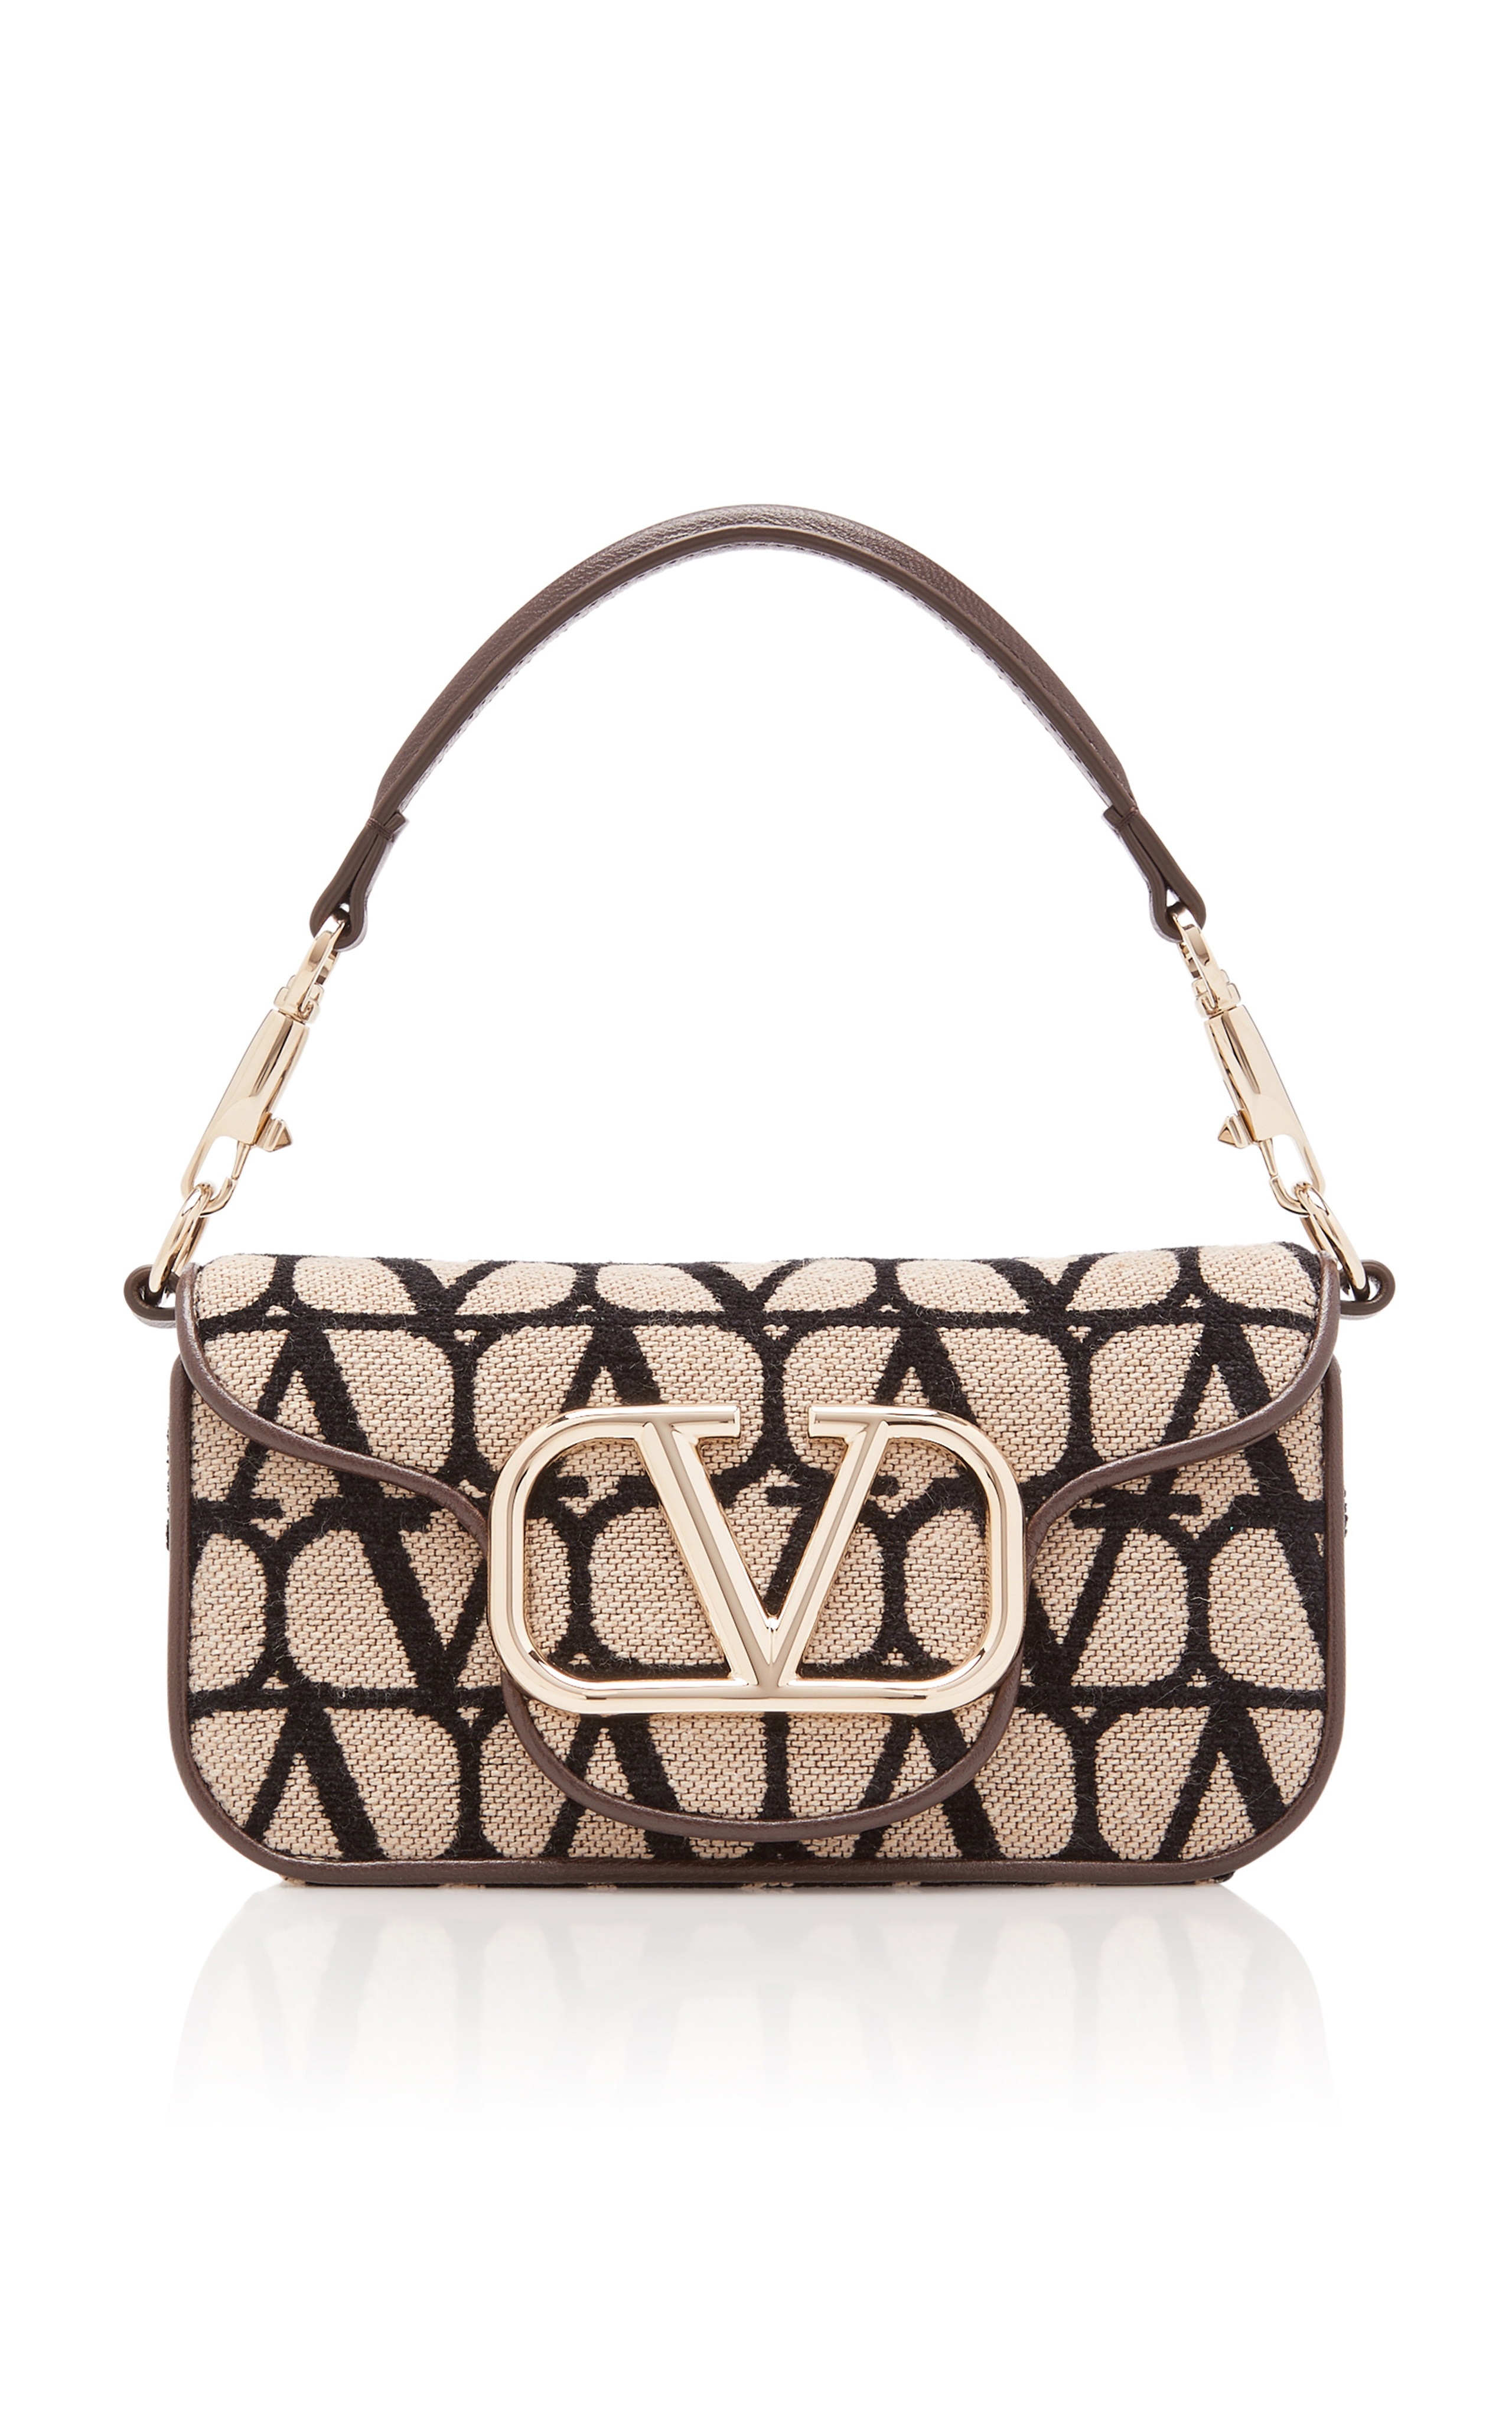 Valentino Bags: Experience Luxury and Elegance with Valentino Bags